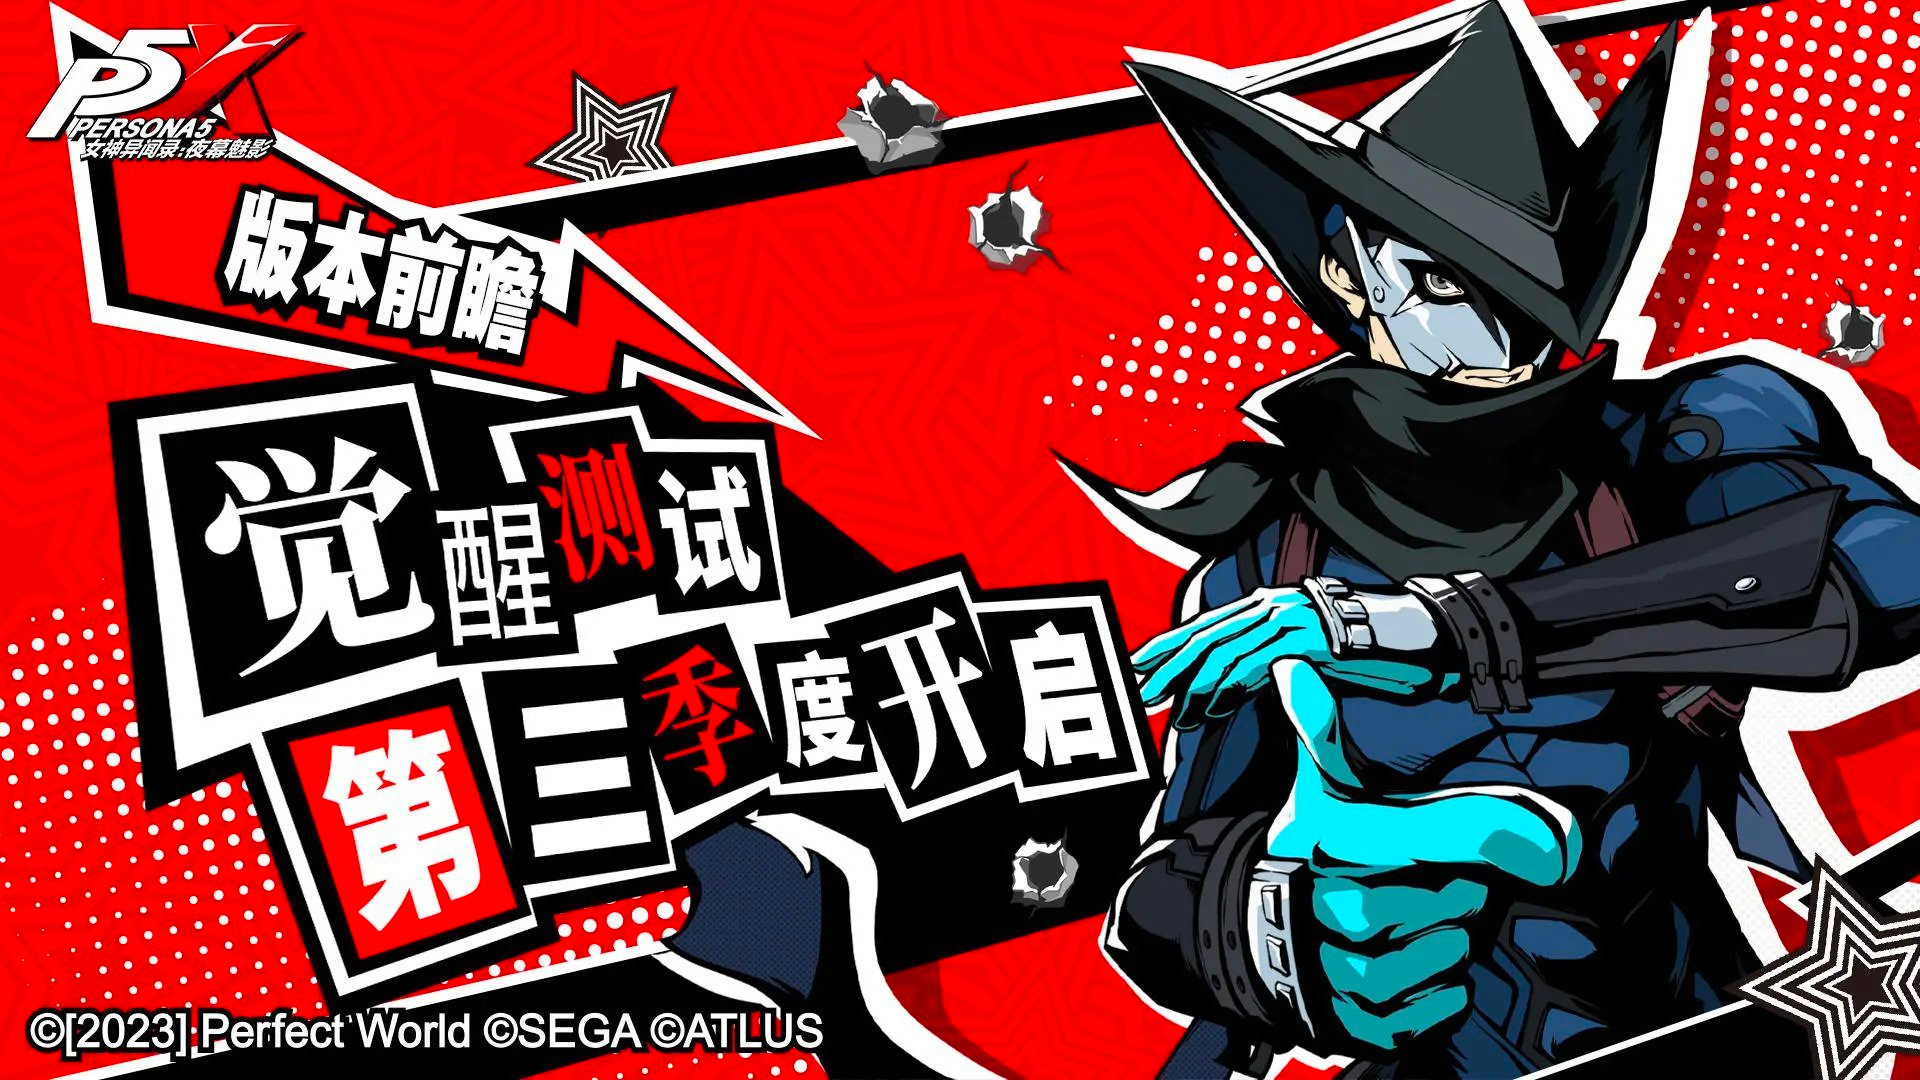 Persona 5: The Phantom X shown in a new trailer - Pledge Times